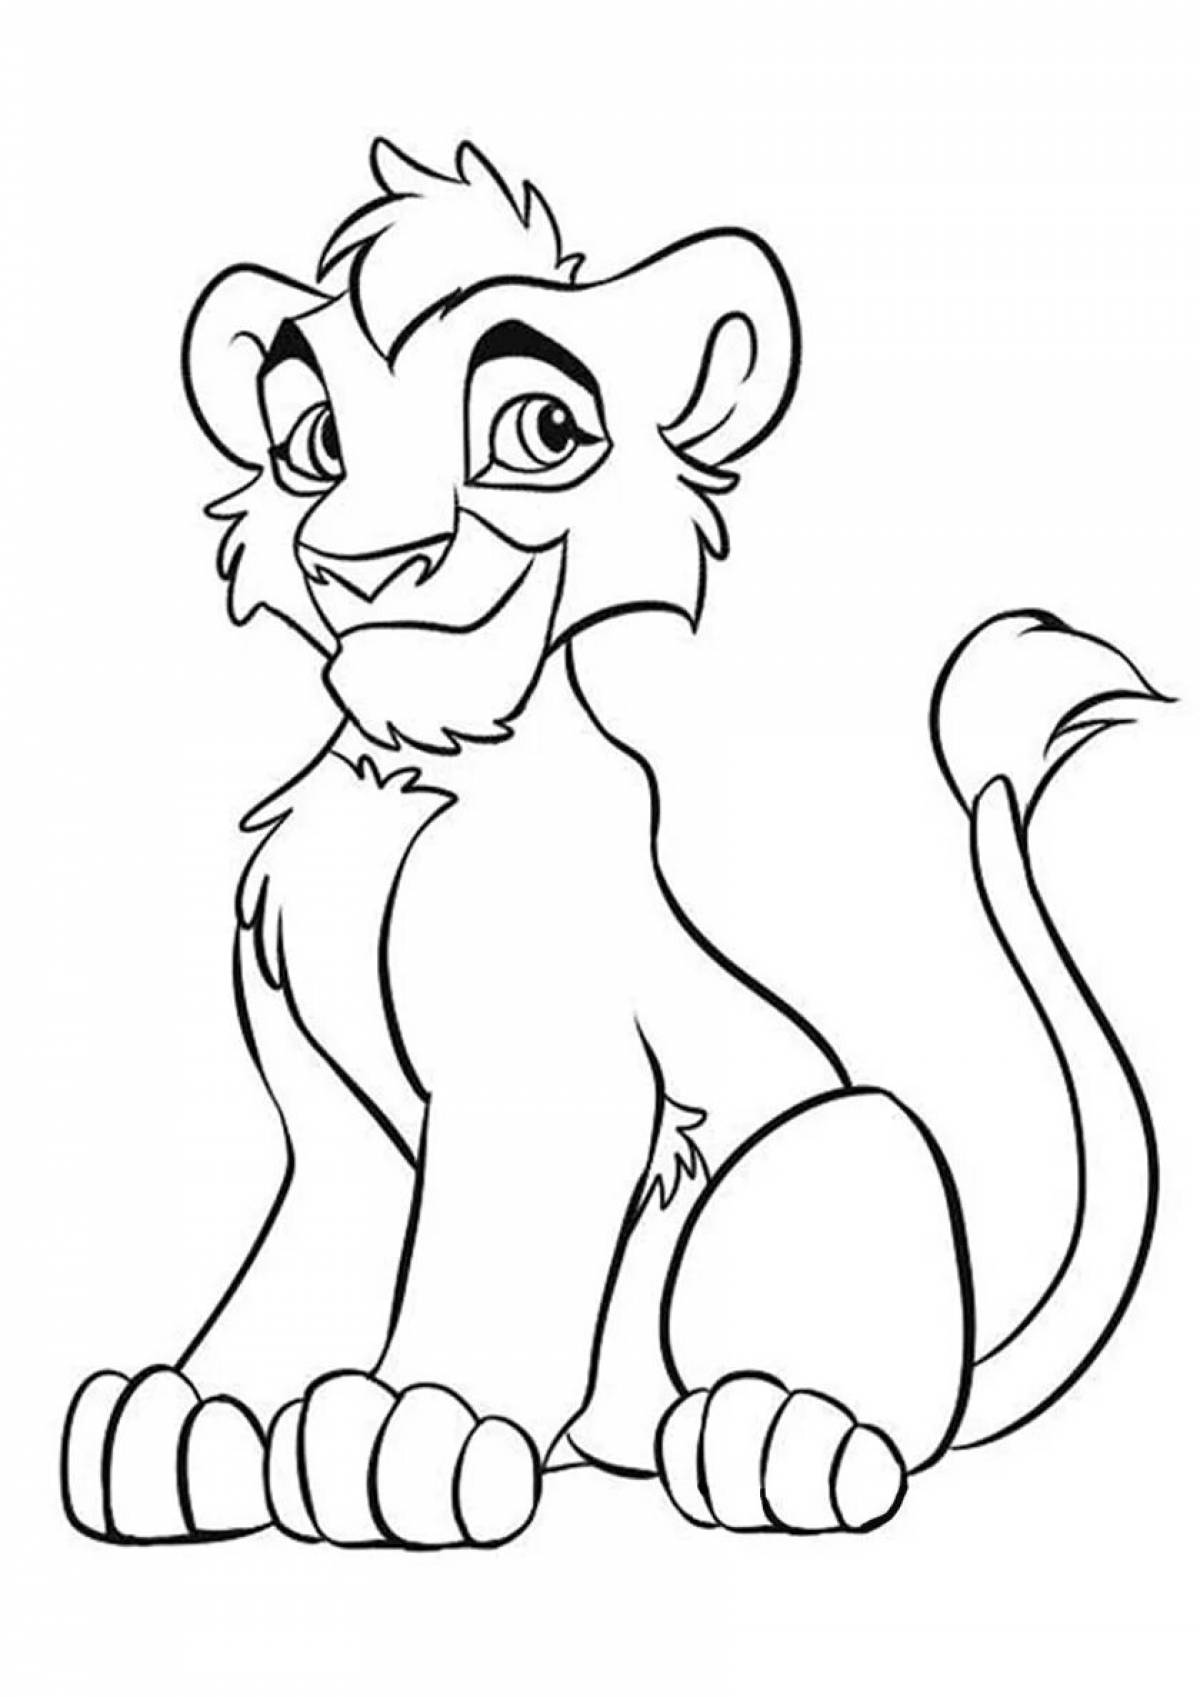 Energetic lion king coloring pages for kids